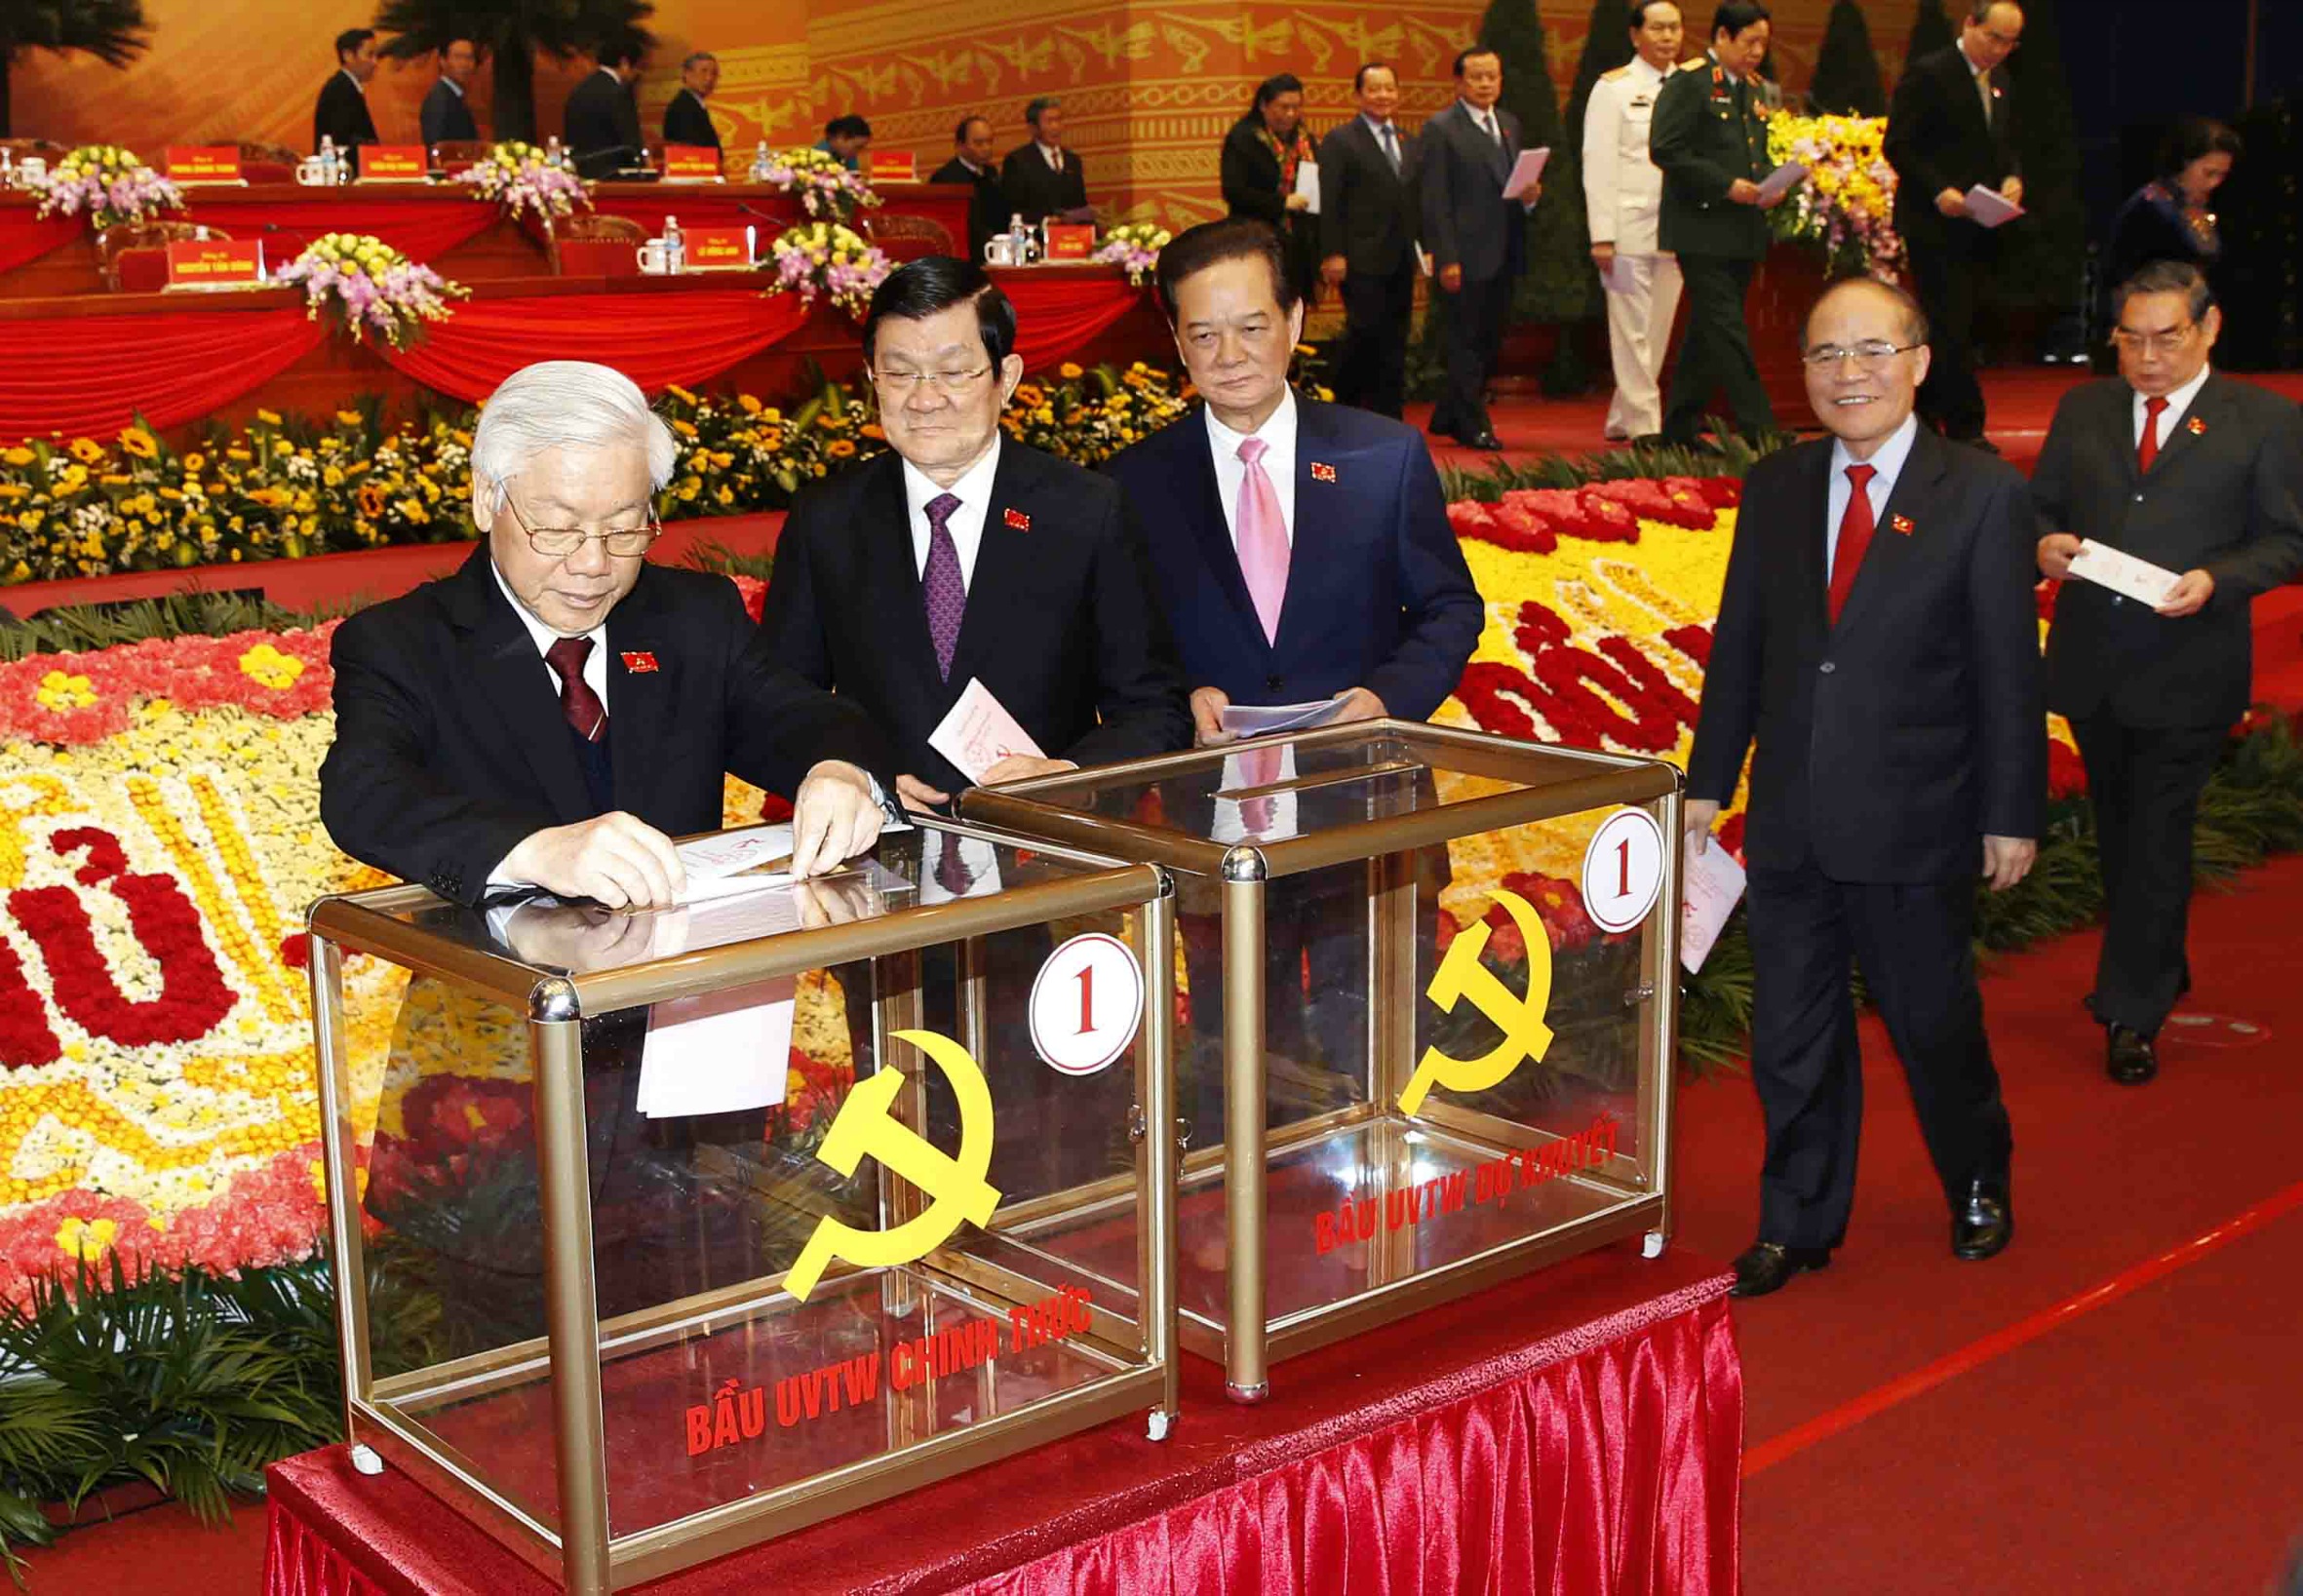 Vietnam’s 12th National Congress voting for members of Party Central Committee